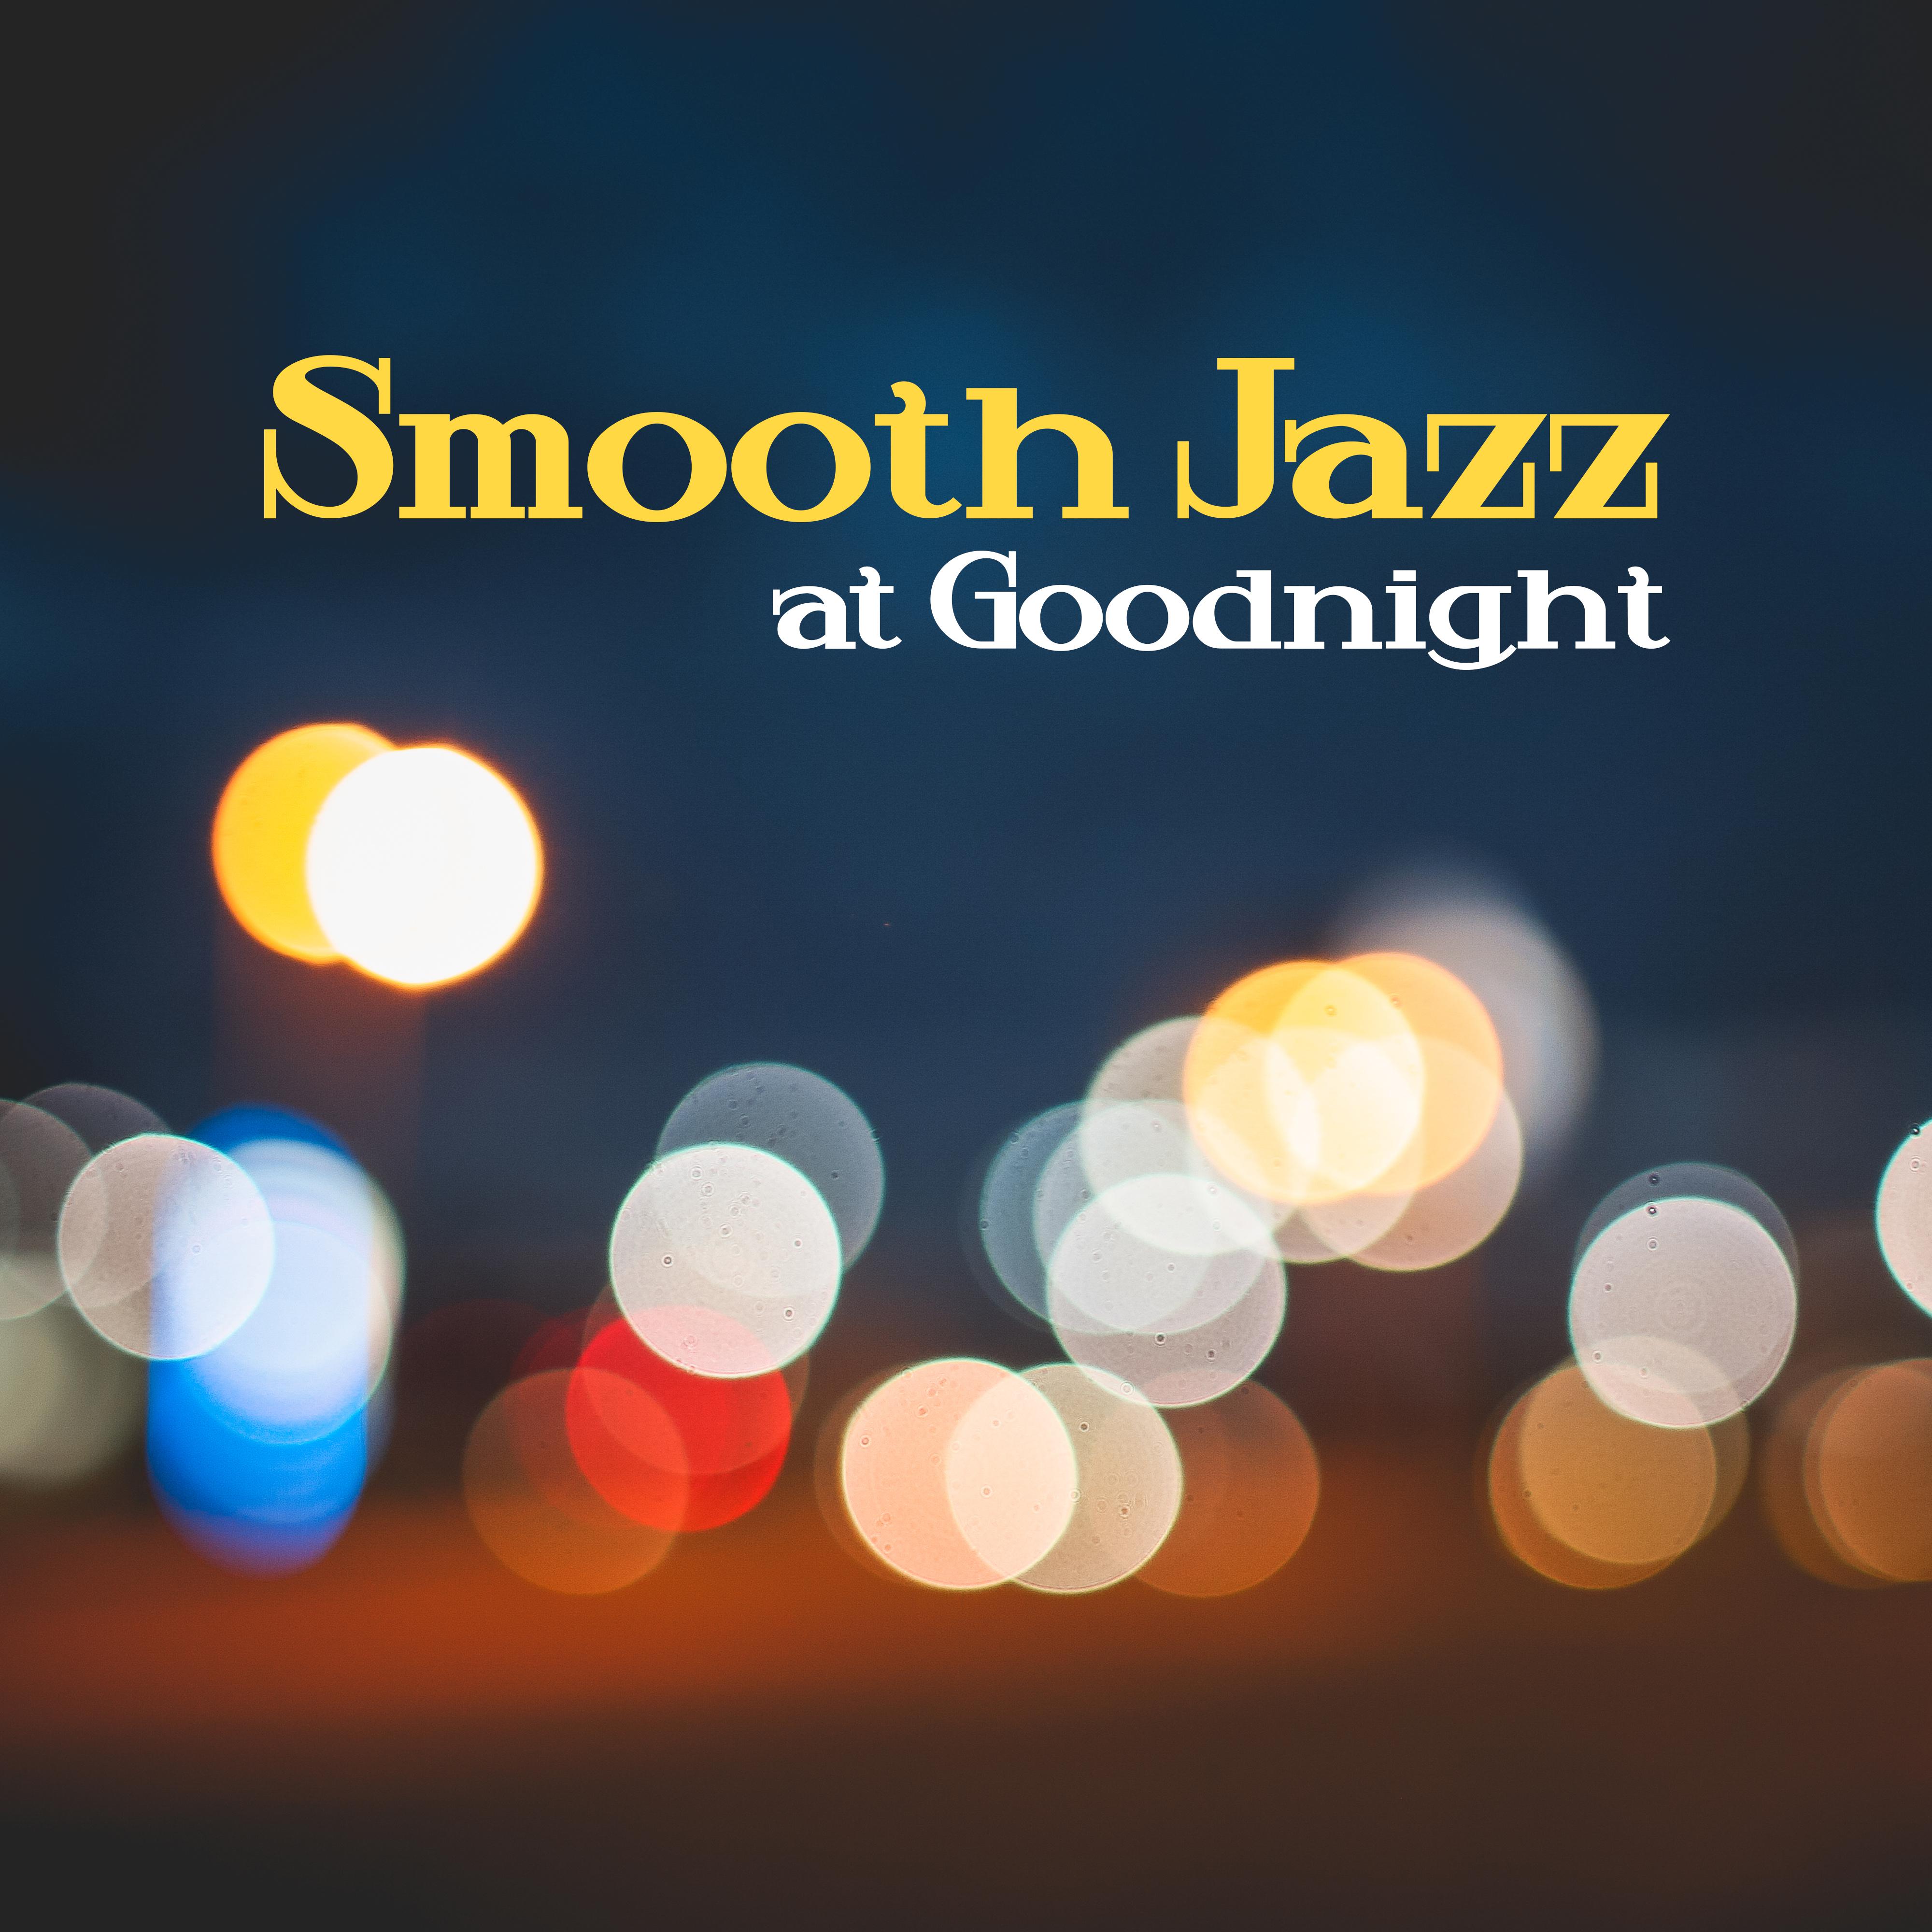 Smooth Jazz at Goodnight  Soft Music to Rest, Relaxed Mind, Jazz Vibes, Calm Lullabies, Relaxing Jazz